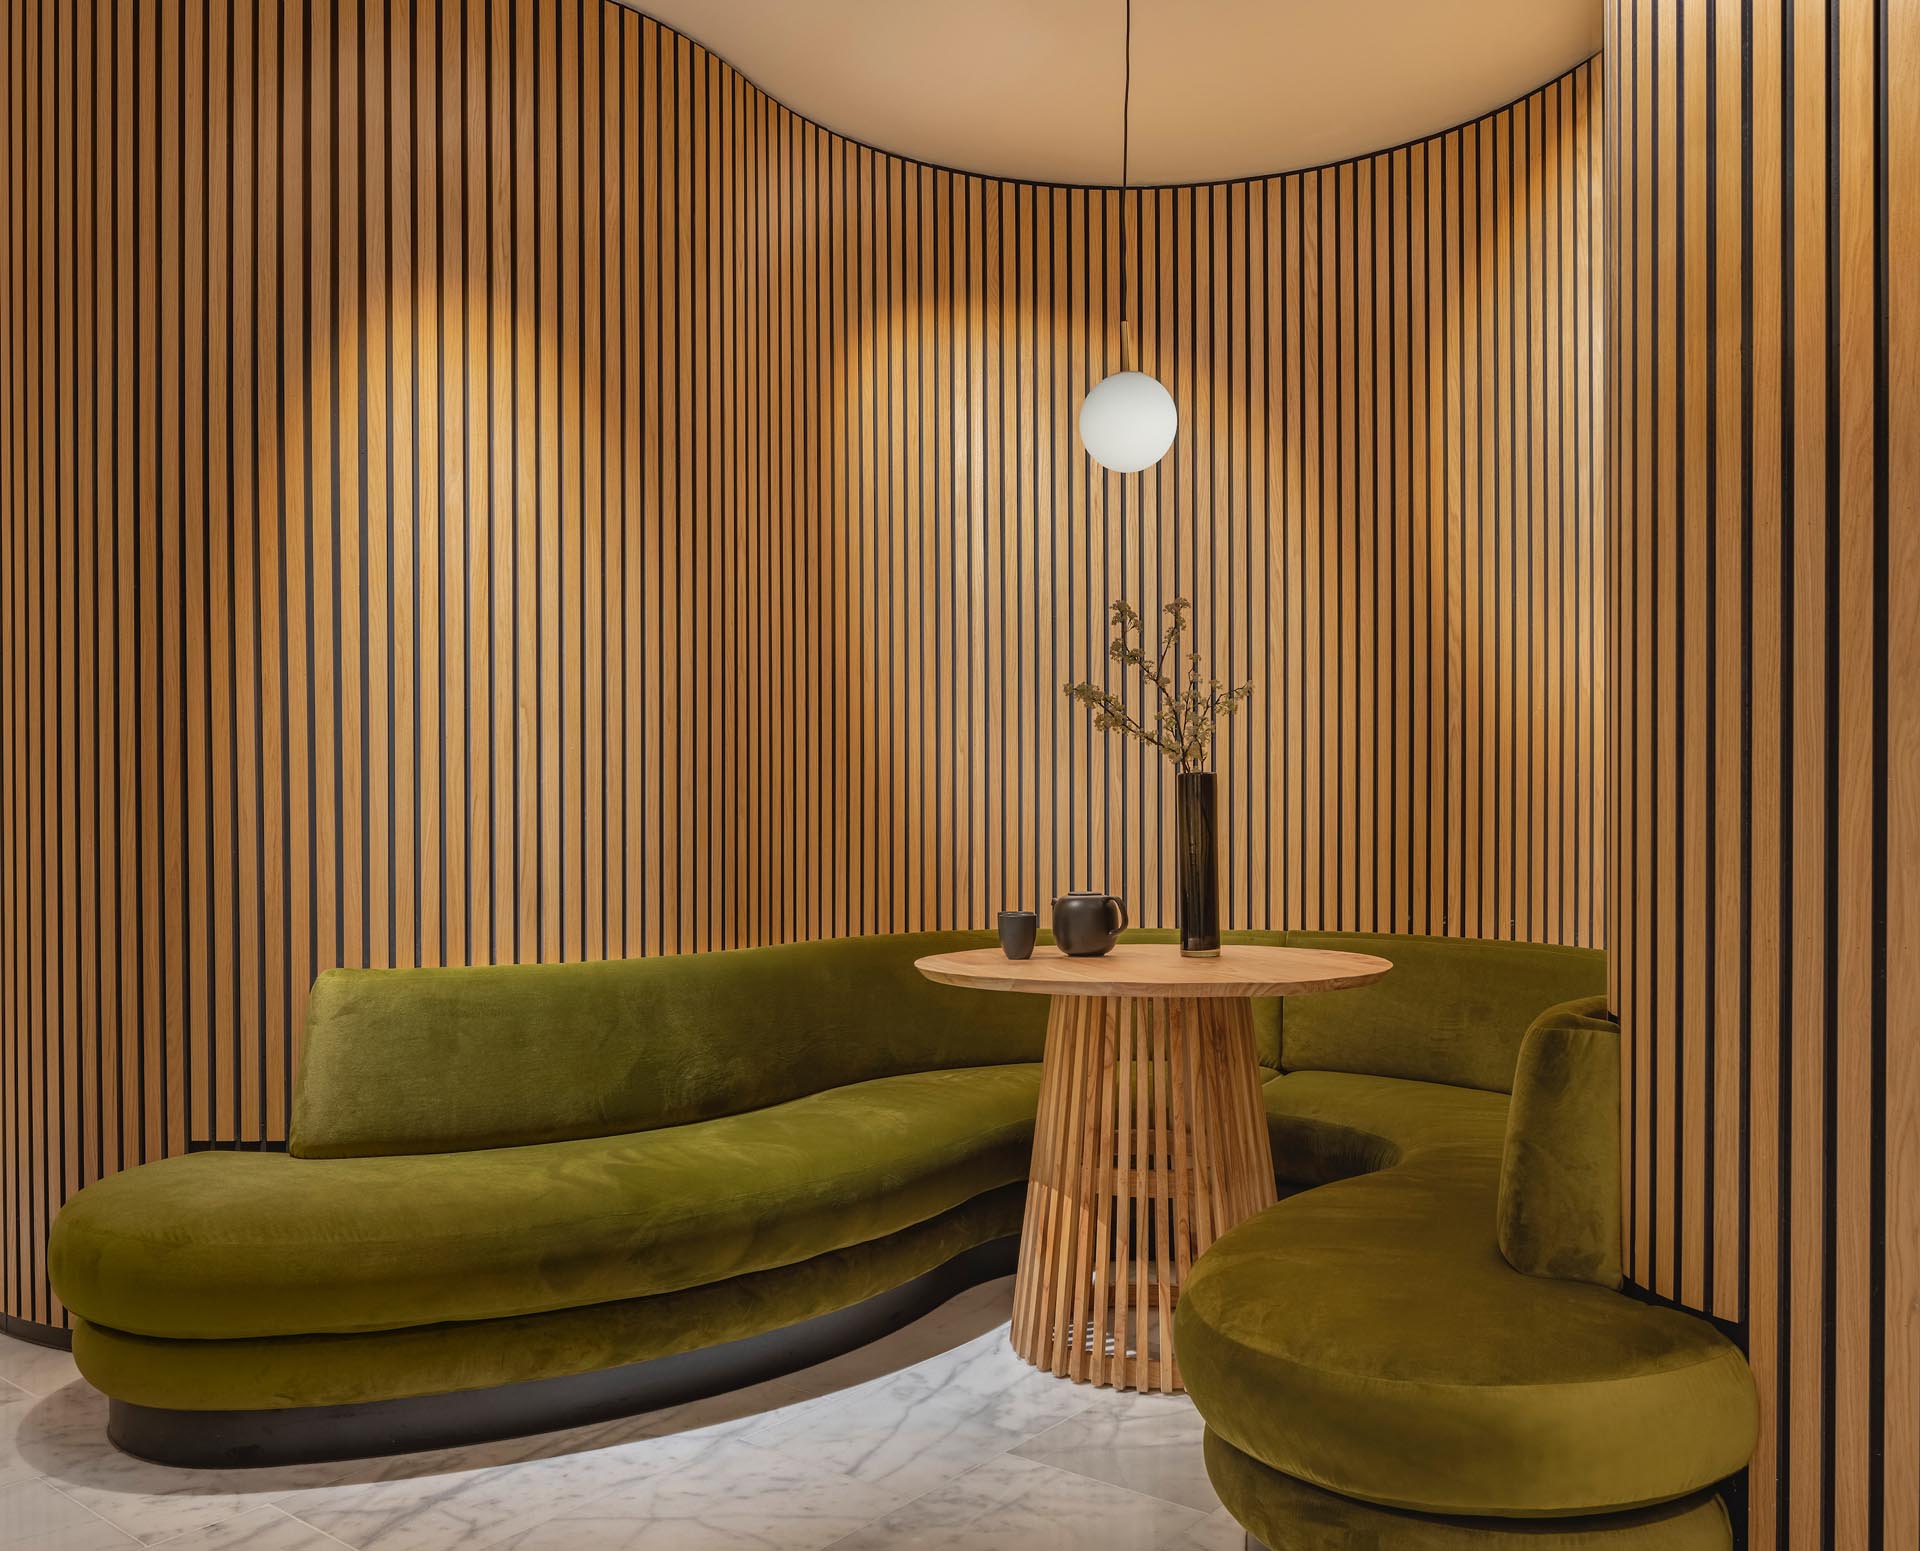 A modern massage boutique with curved wood walls and benches that create a sense of calm and relaxing.